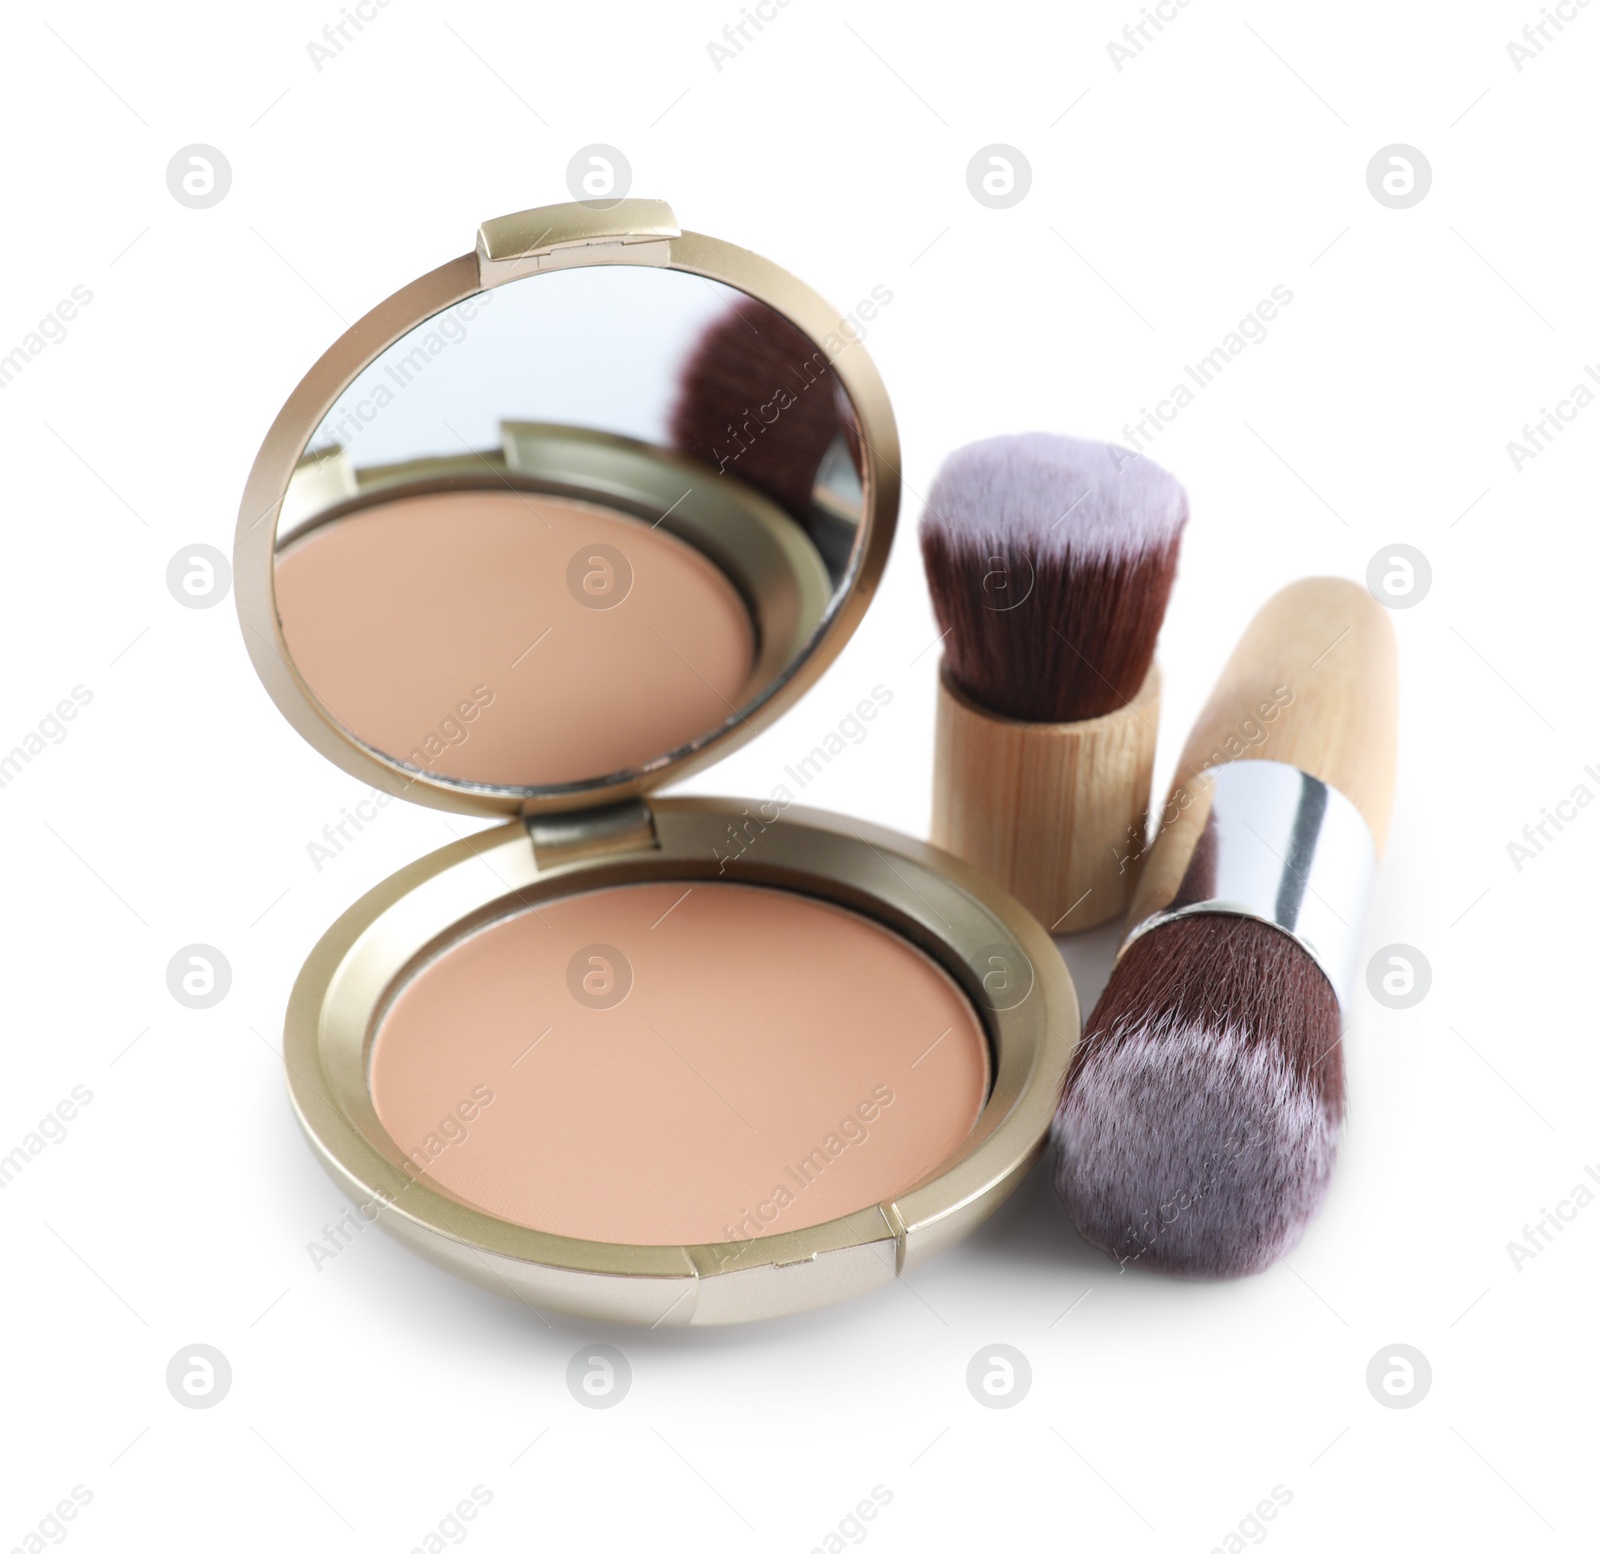 Photo of Face powder and brushes isolated on white. Makeup product